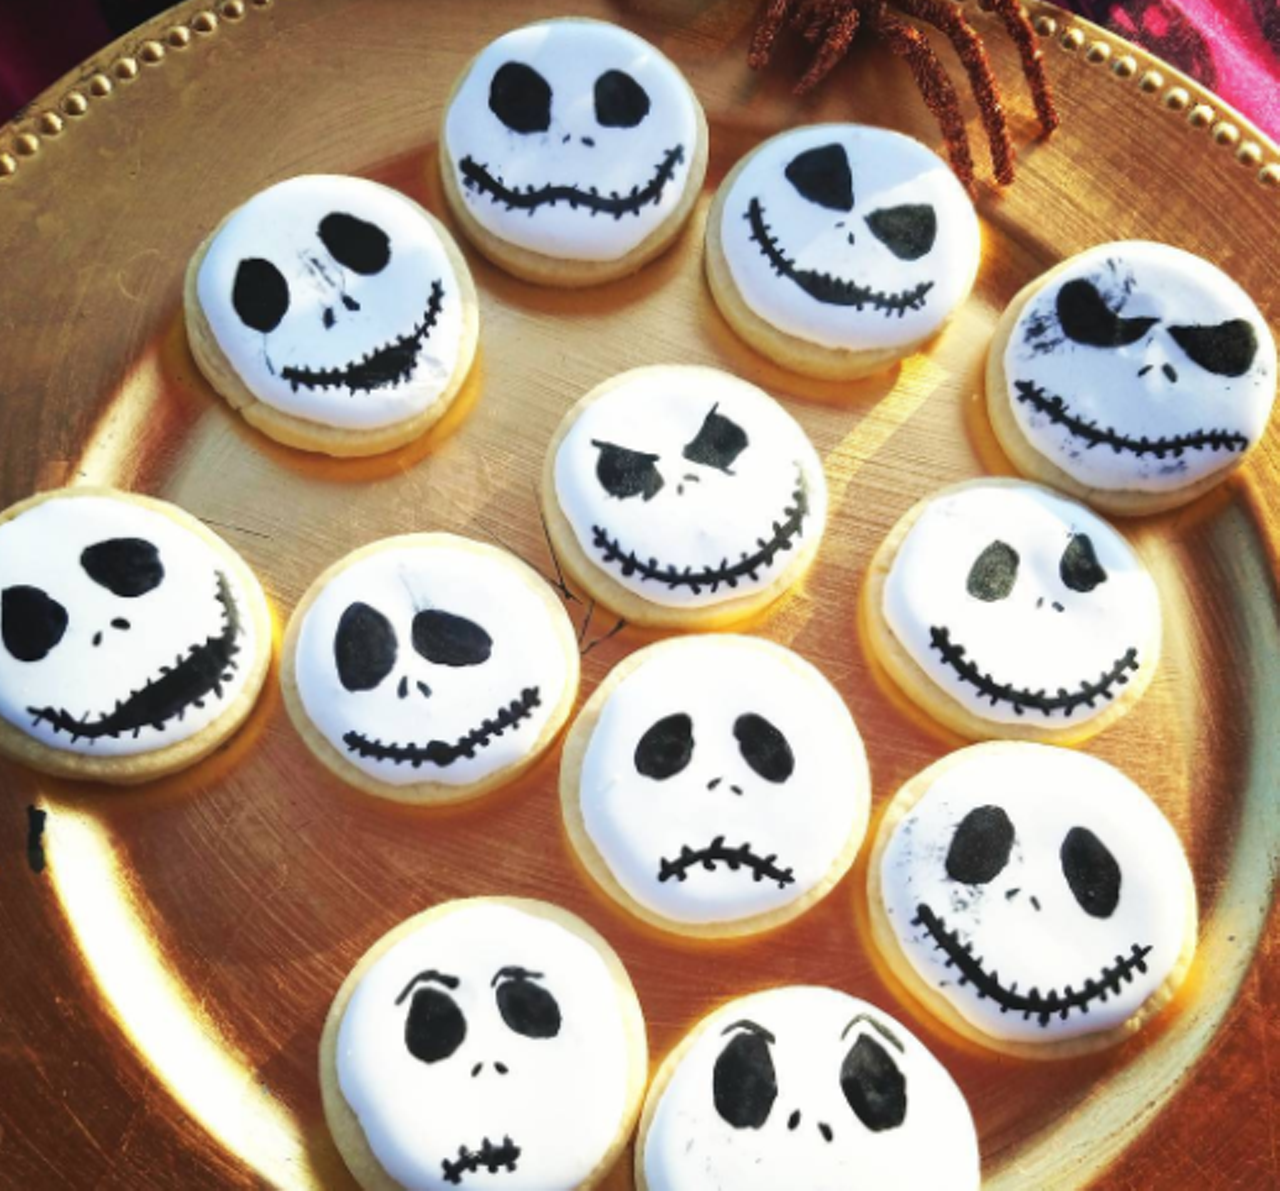 Cherry Pop Bake Shop
(210) 394-3364
Taste the many faces of the scary Jack Skellington with Cherry Pop sugar cookies. Available through various pop-ups and orders.
Photo via Instagram, cherry_pop_bakeshop